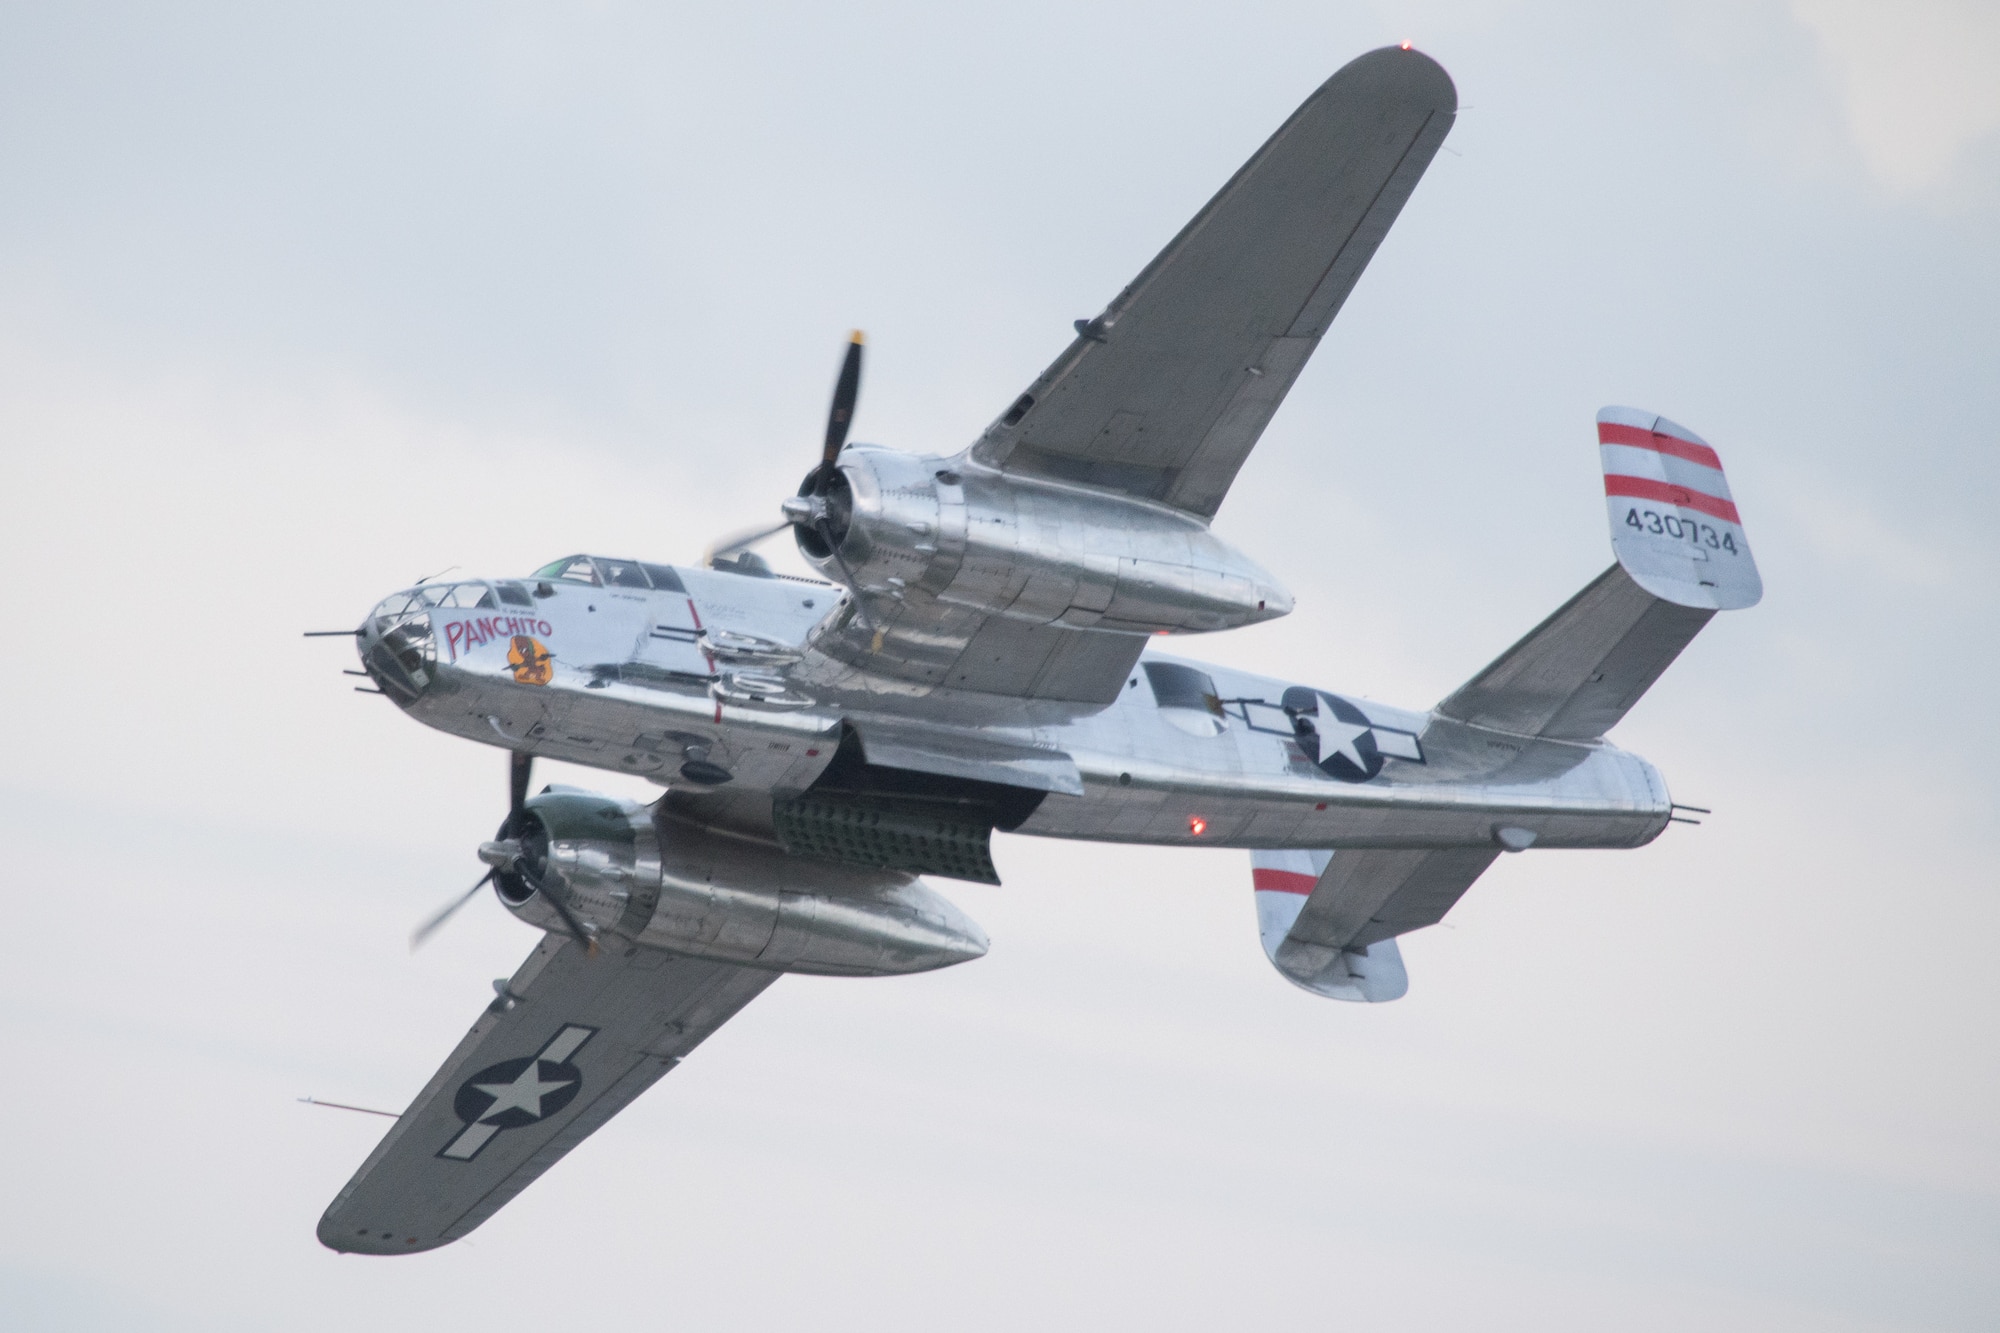 A World War II era B-25 Mitchell “Panchito” bomber flies over the crowd during the 2019 Thunder Over Dover Air Show, Sept. 13, 2019, at Dover Air Force Base, Del. The show featured aerial performances from military and civilian aircraft. (U.S. Air Force photo by Mauricio Campino)